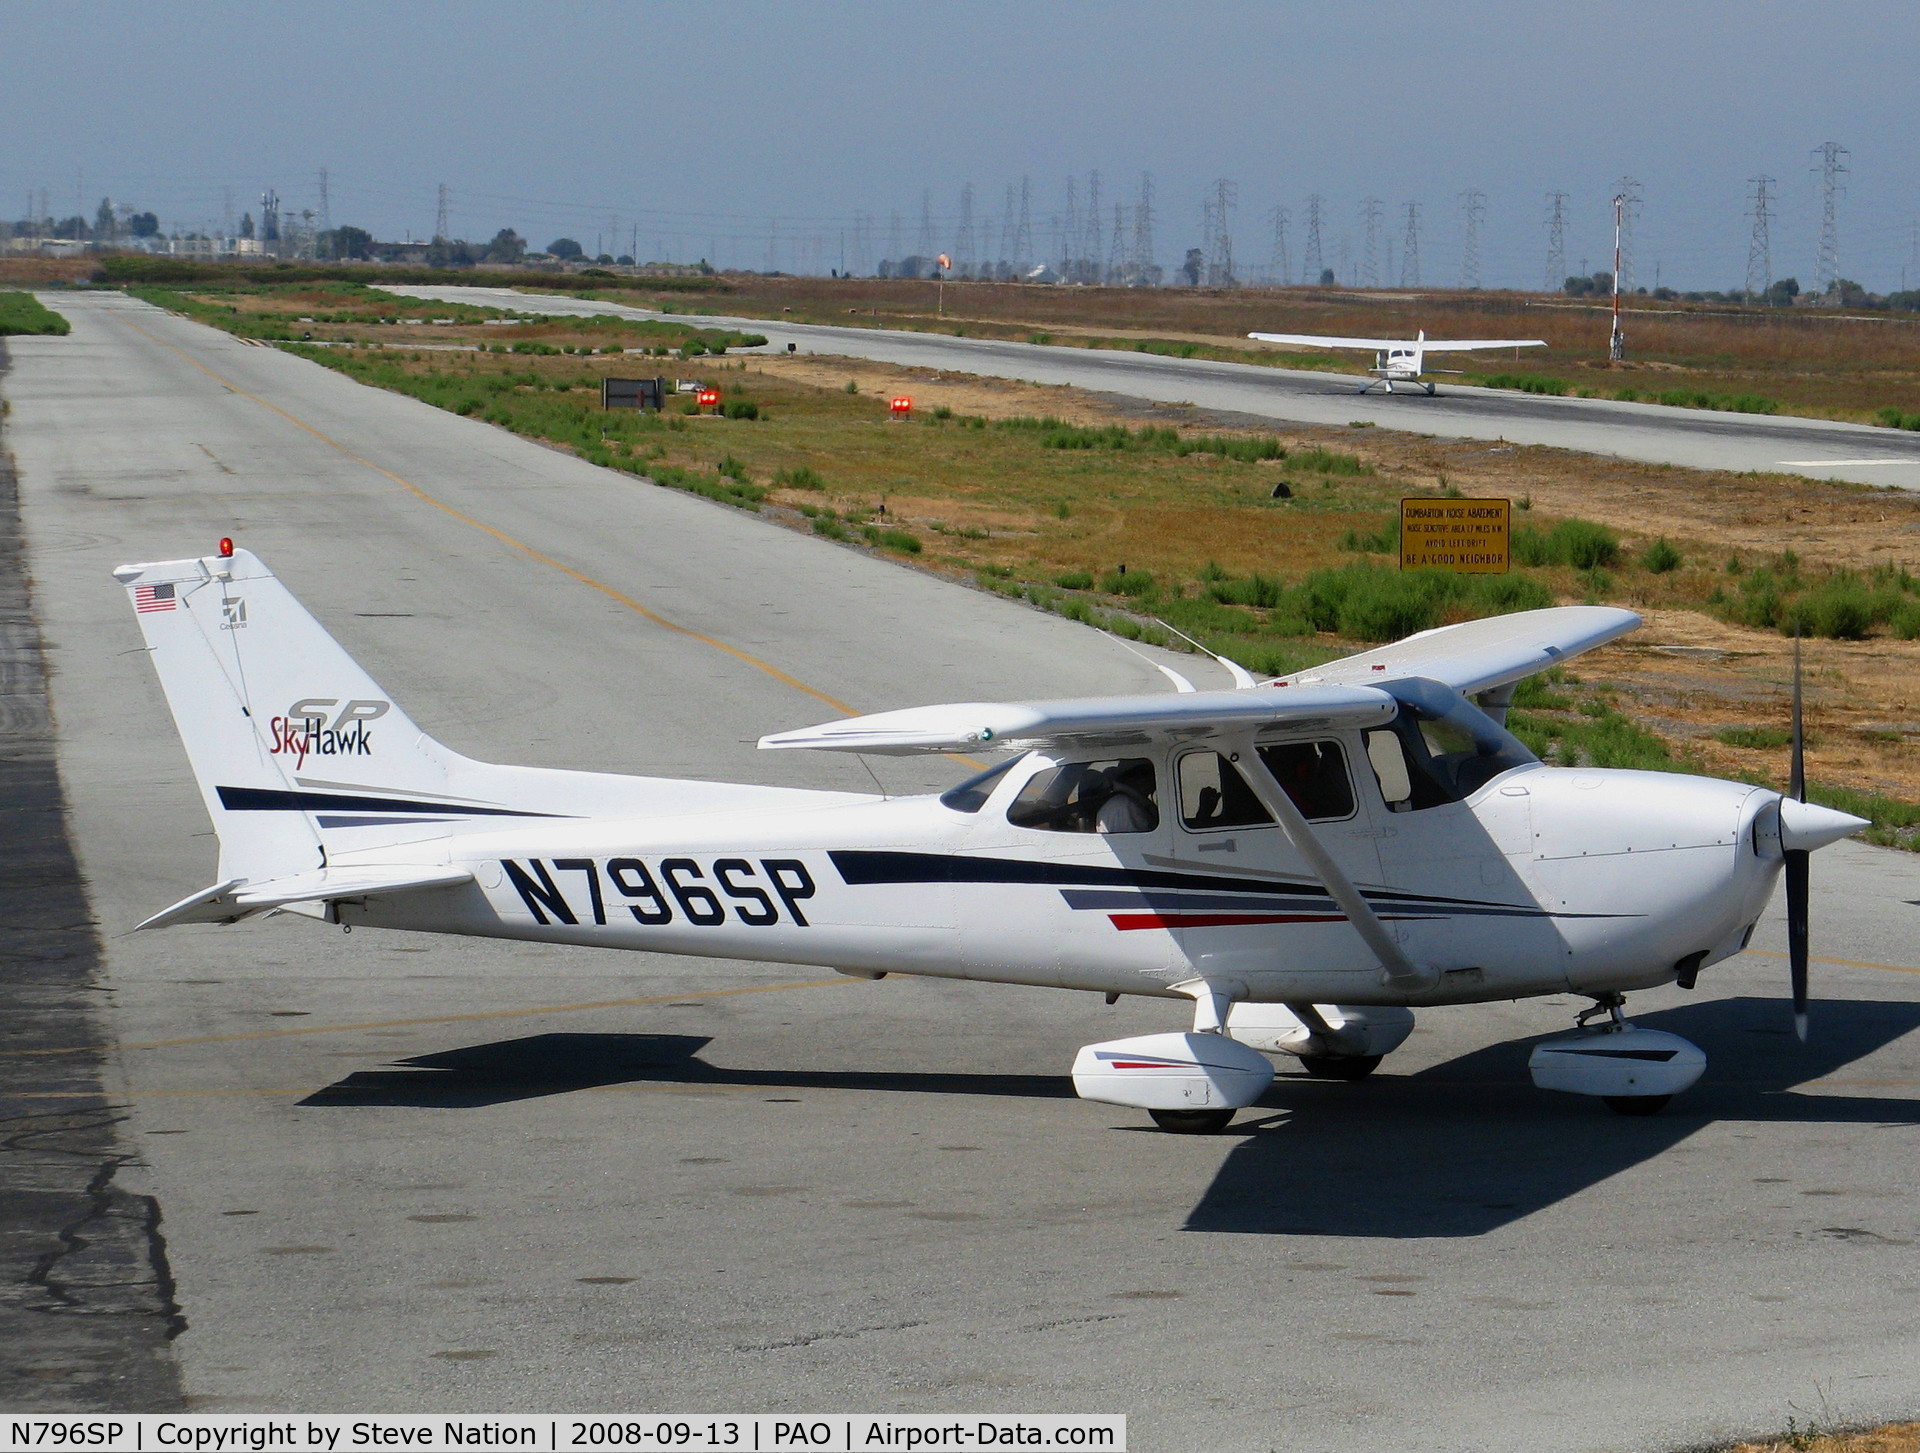 N796SP, 2001 Cessna 172S C/N 172S8720, 2001 Cessna 172S taxying @ Palo Alto, CA